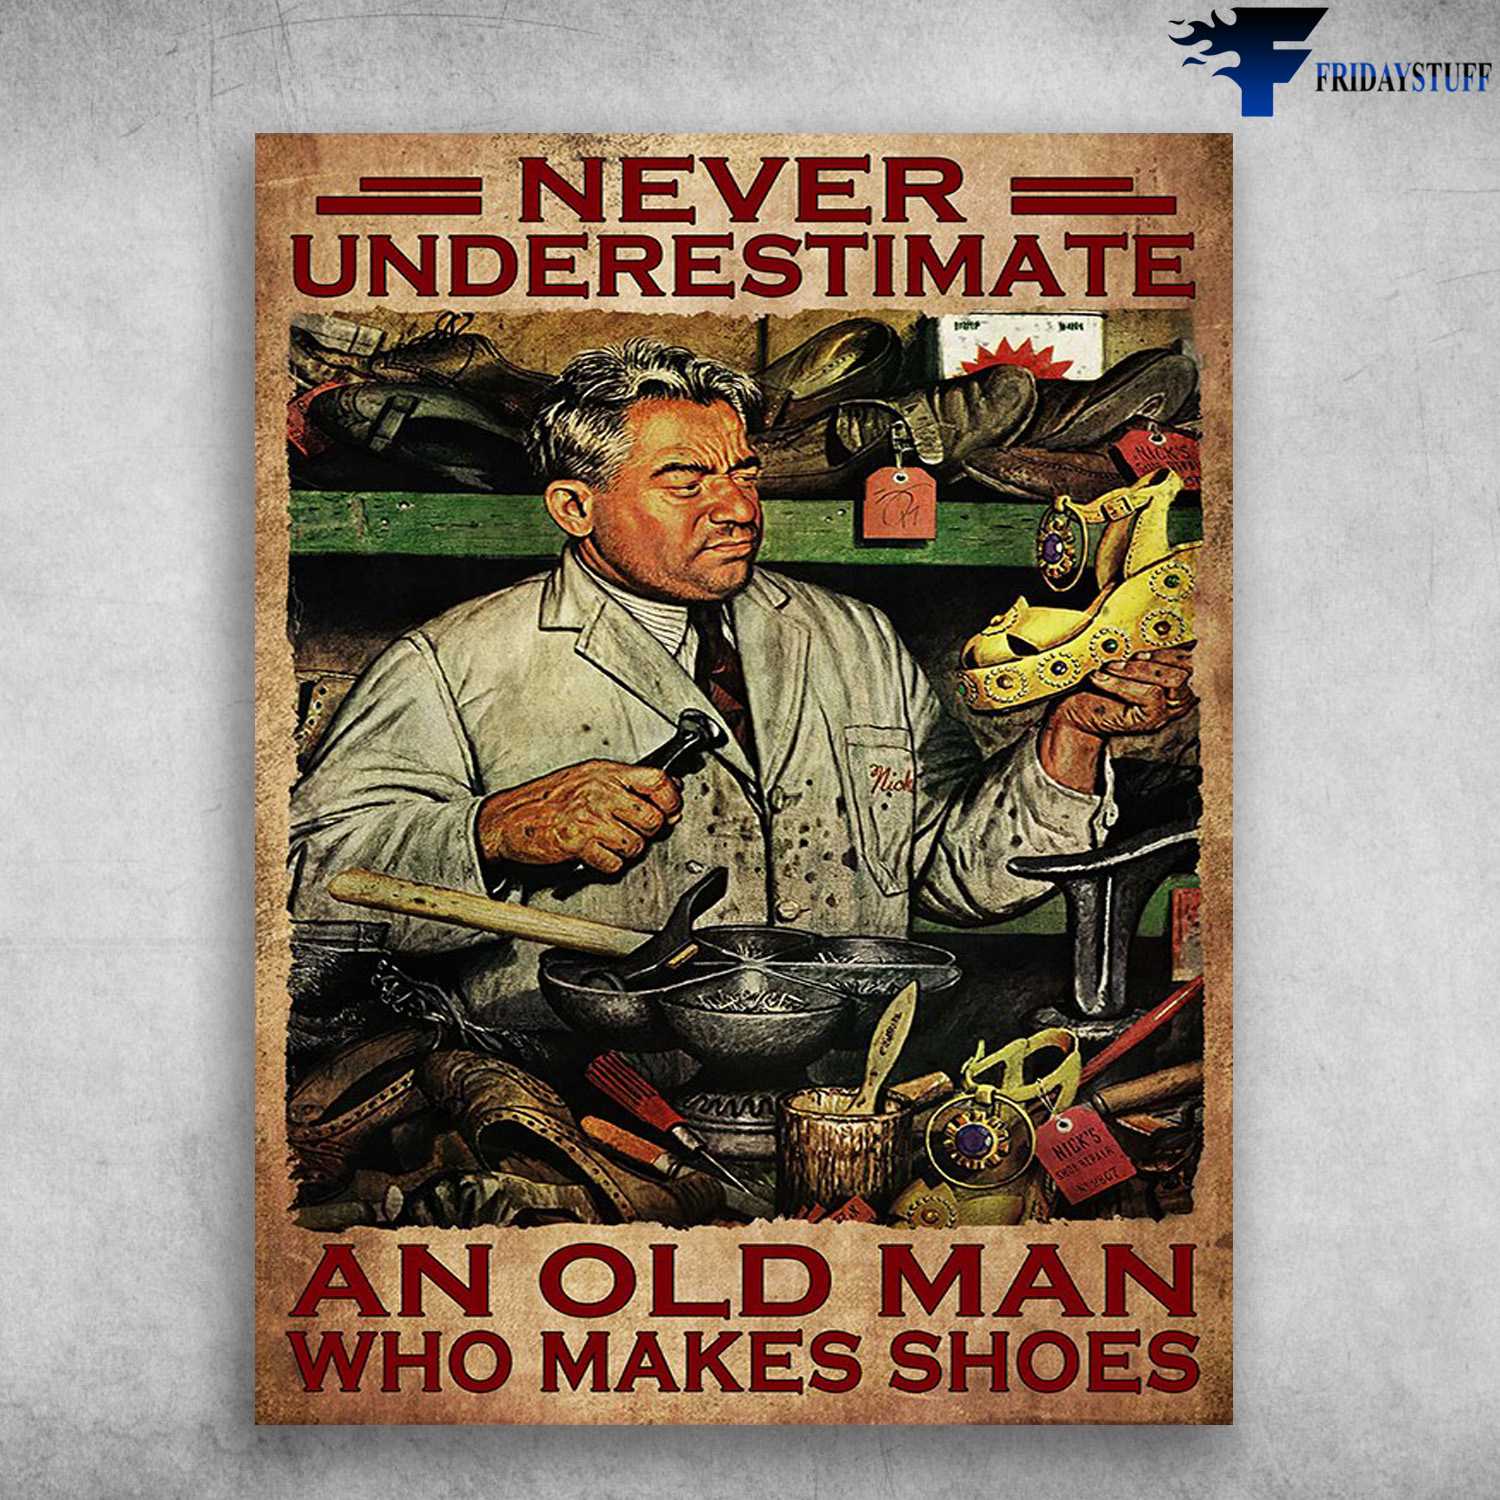 Shoe Maker, Never Underestimate, An Old Man, Who Makes Shoes